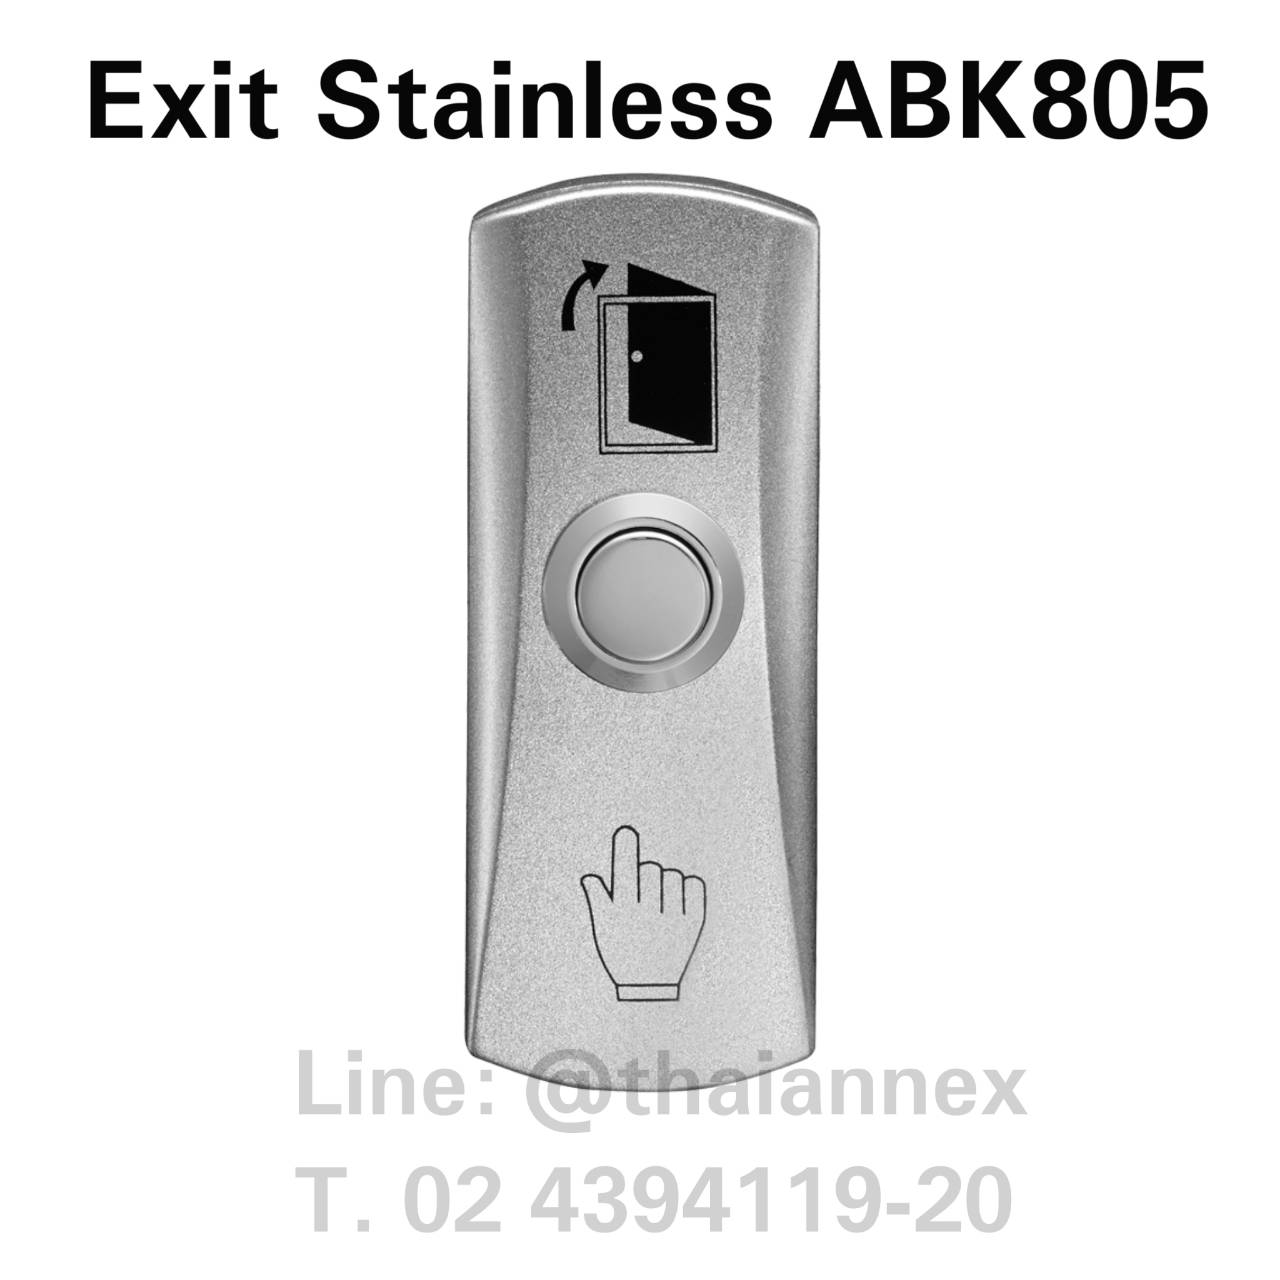 Exit Stainless ABK805